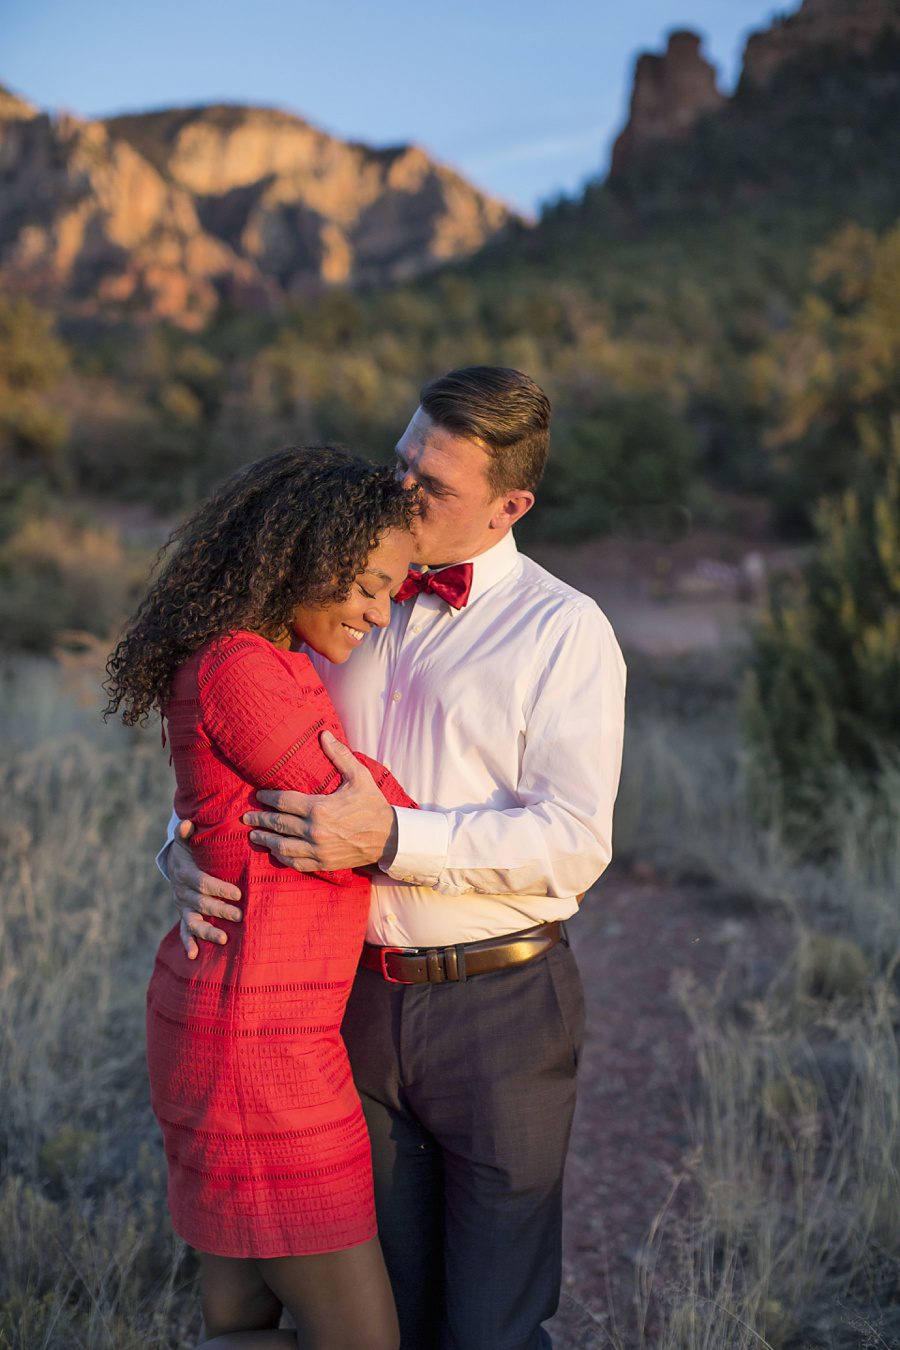 A man and woman embrace with the red rocks behind them